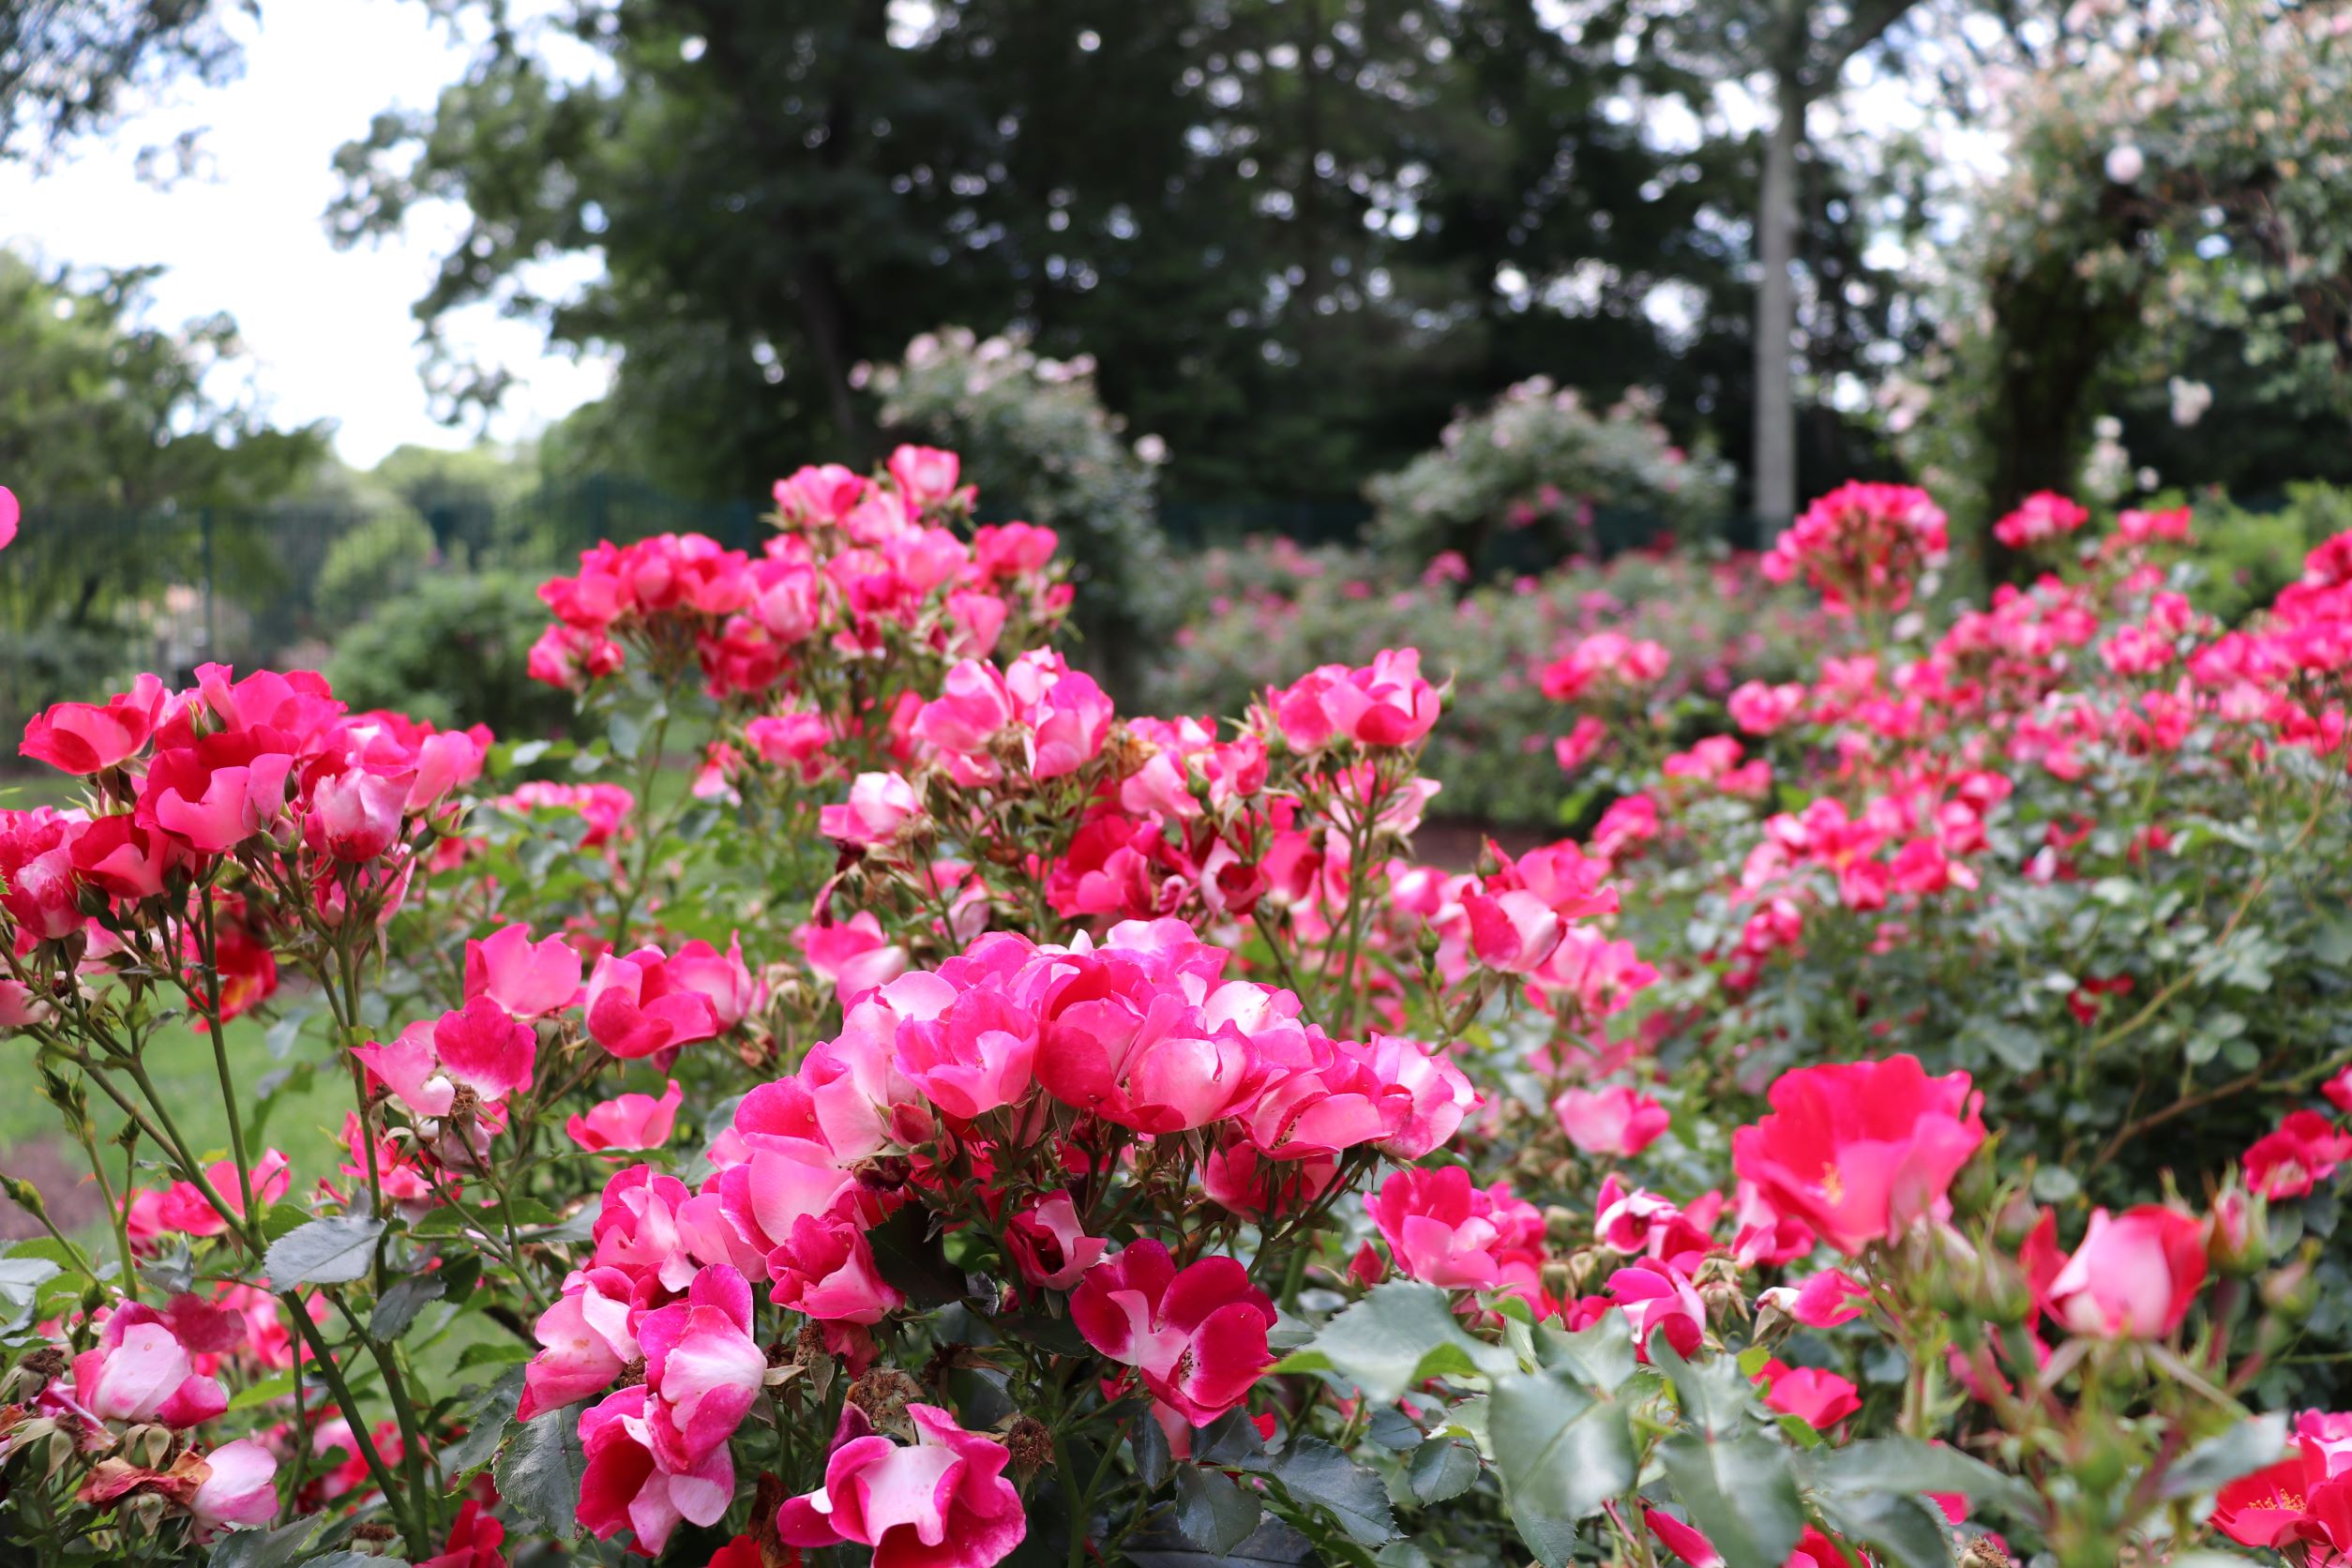 image of pink roses in the norwich rose garden.